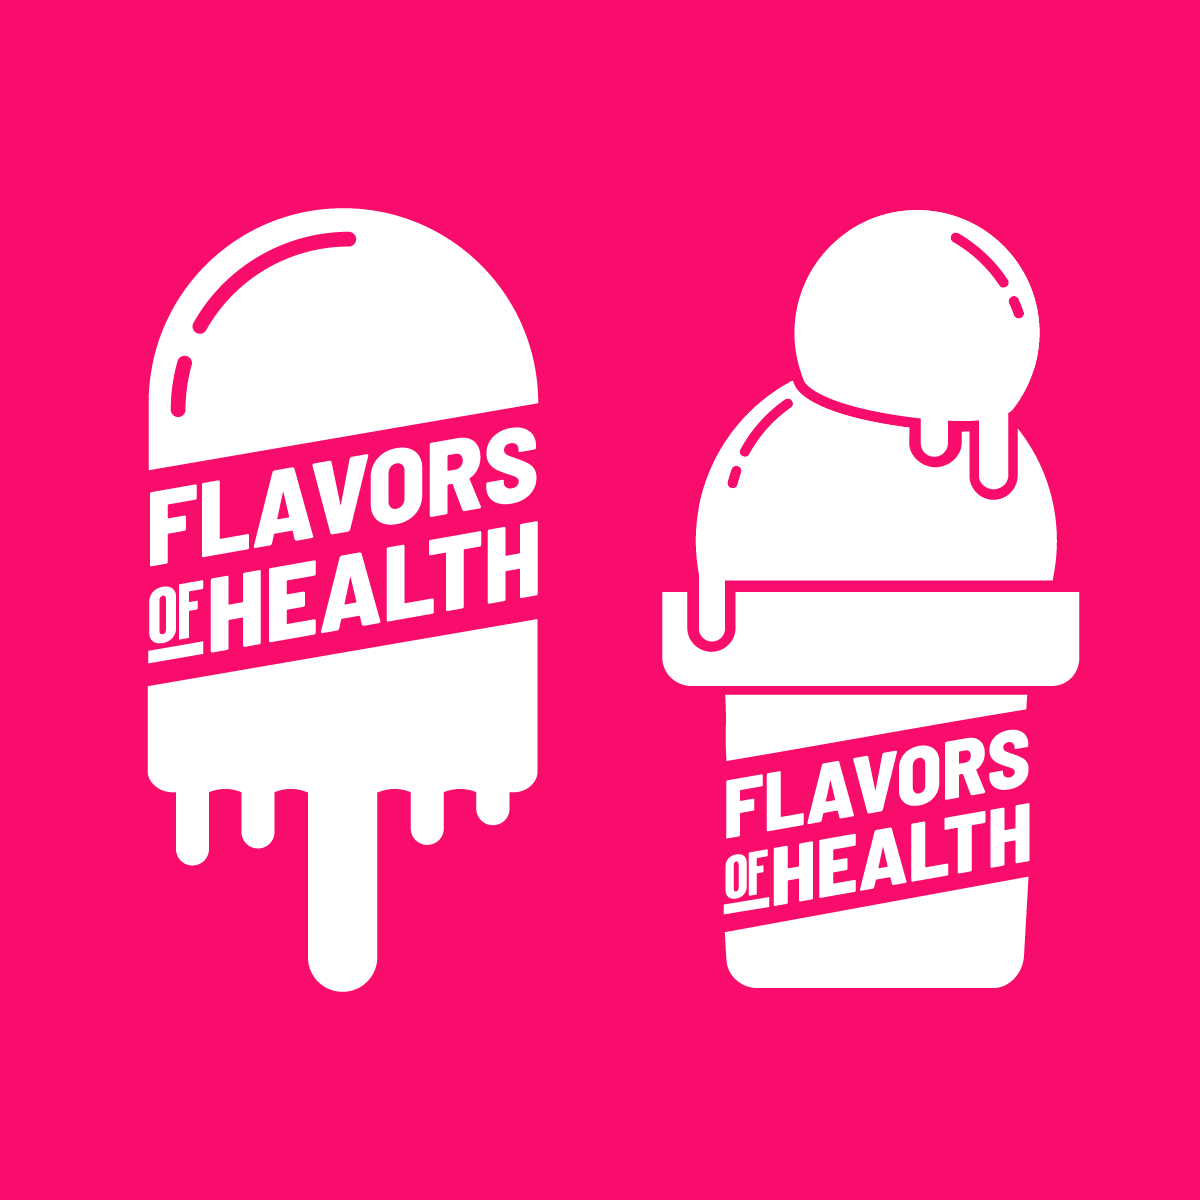 Flavors of Health Combined logo